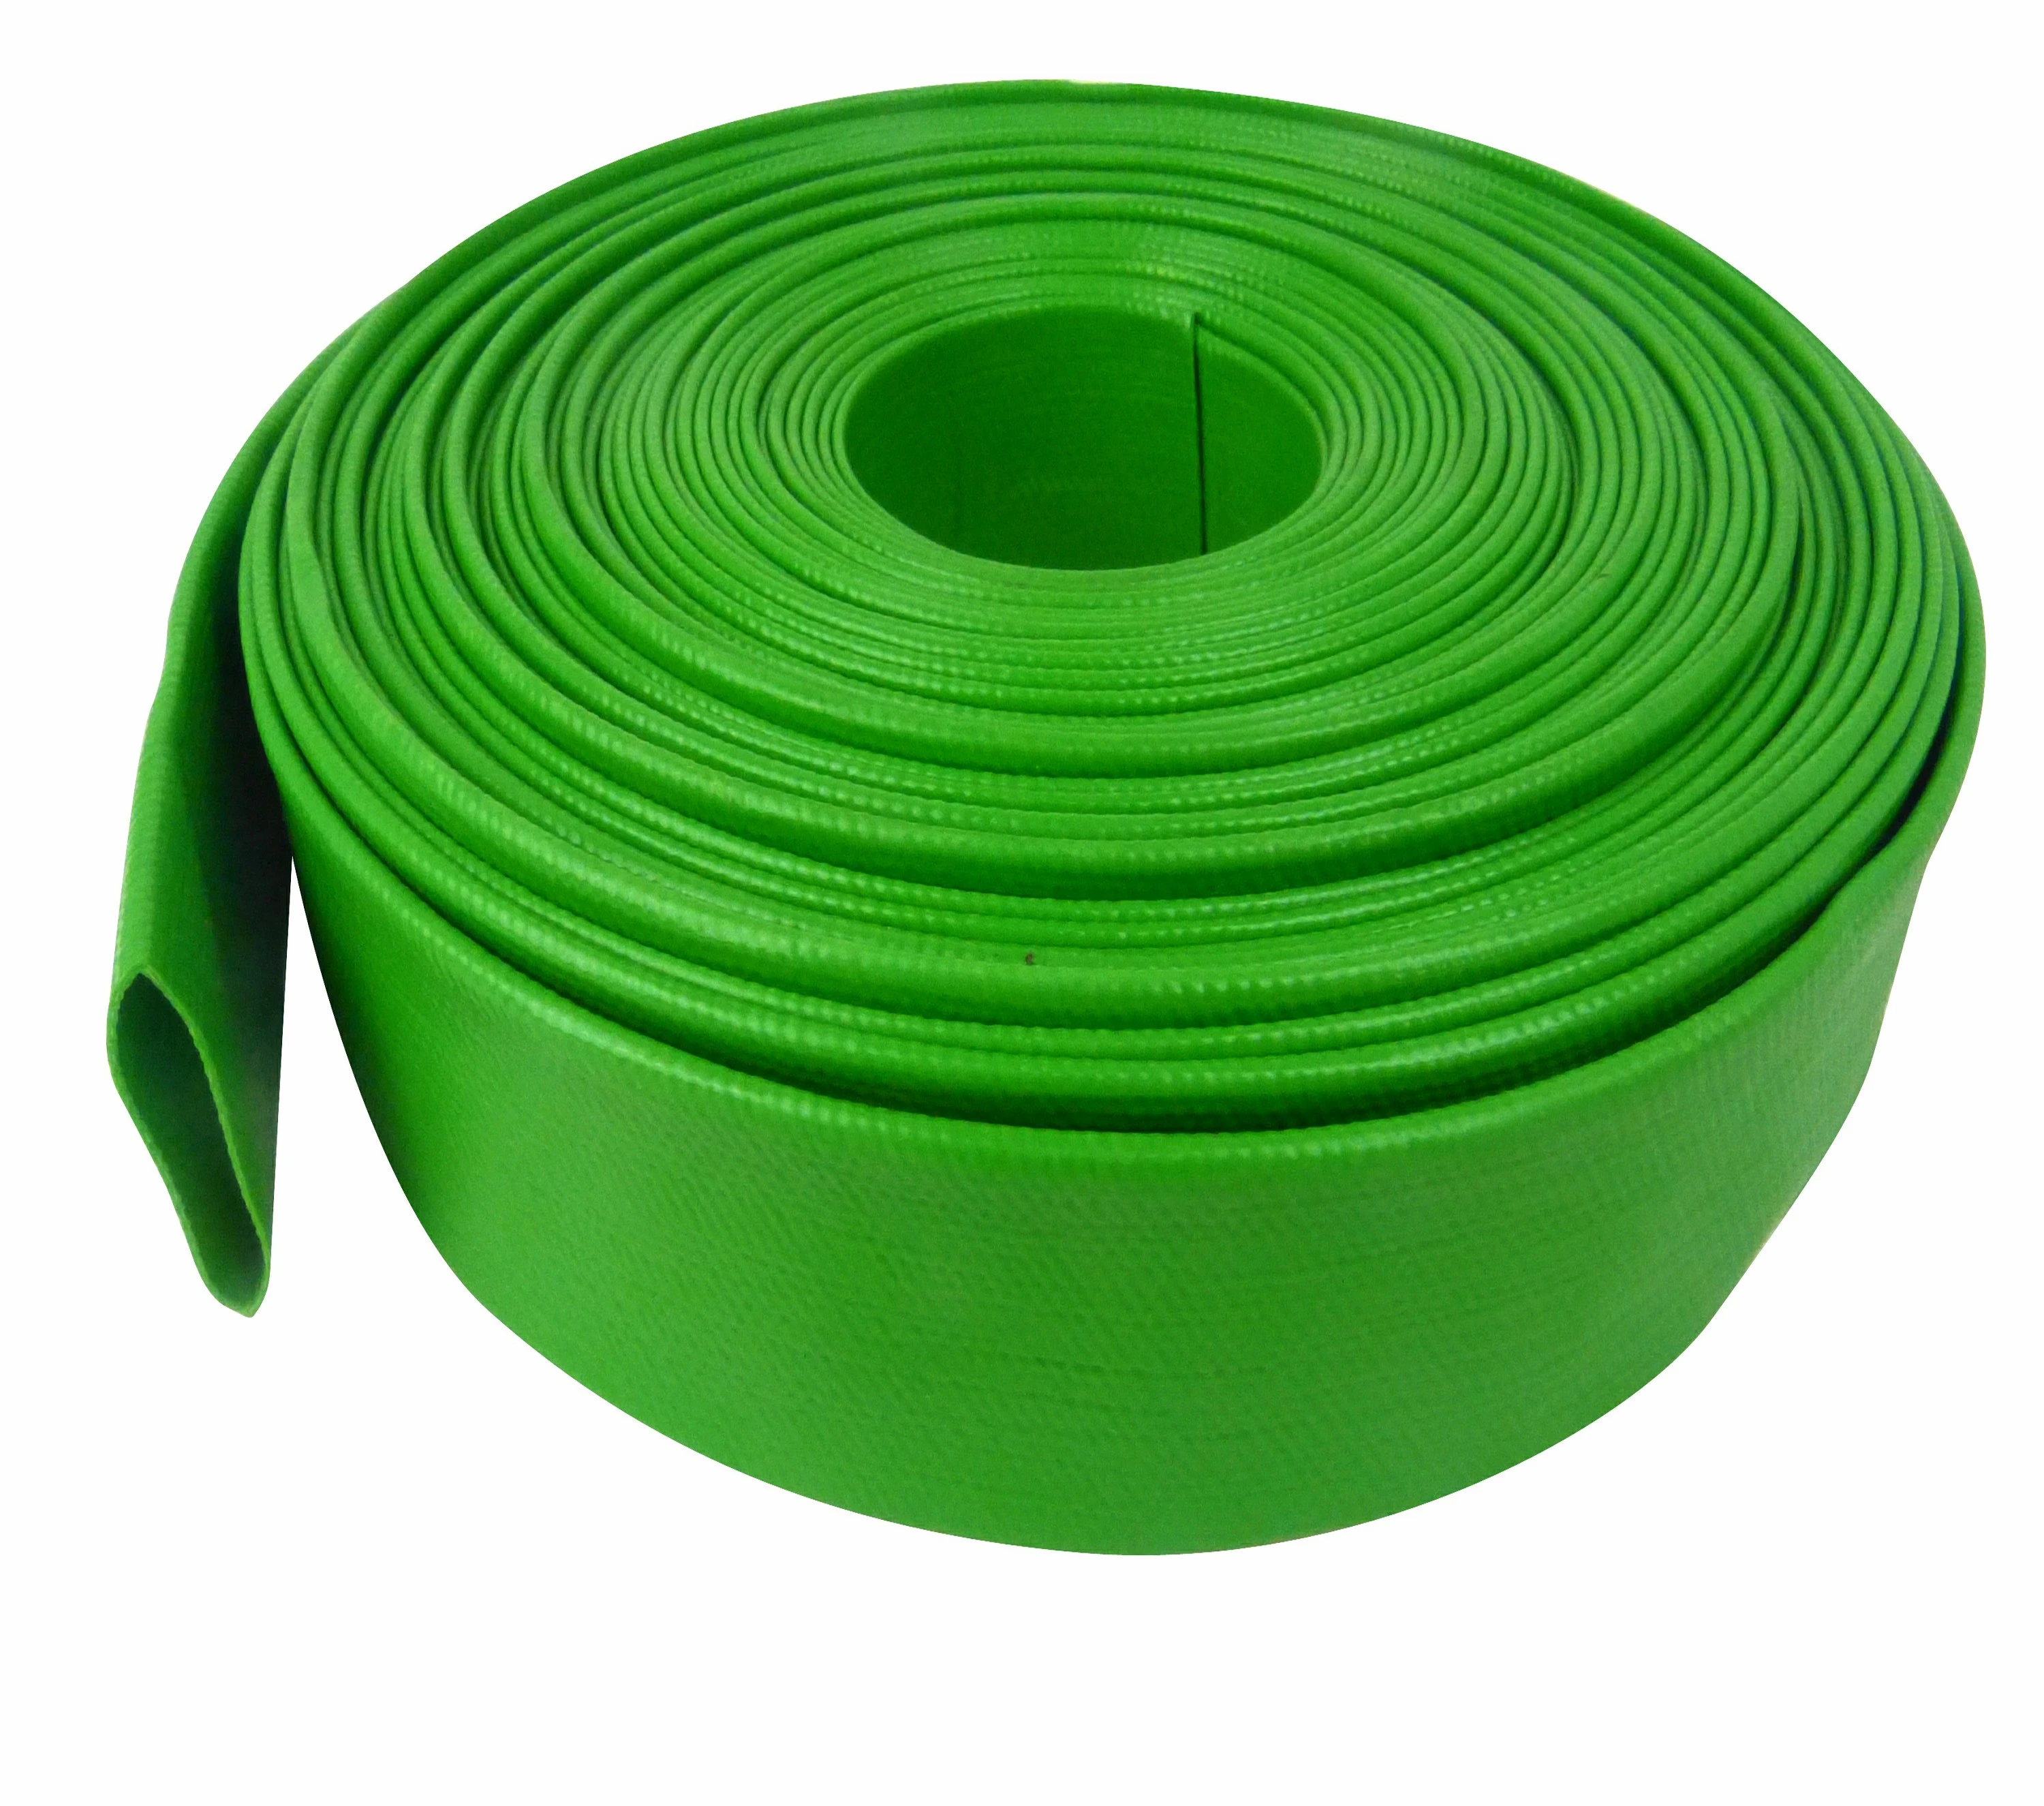 Factory price layflat tubing flexible pvc water delivery plastic tubes